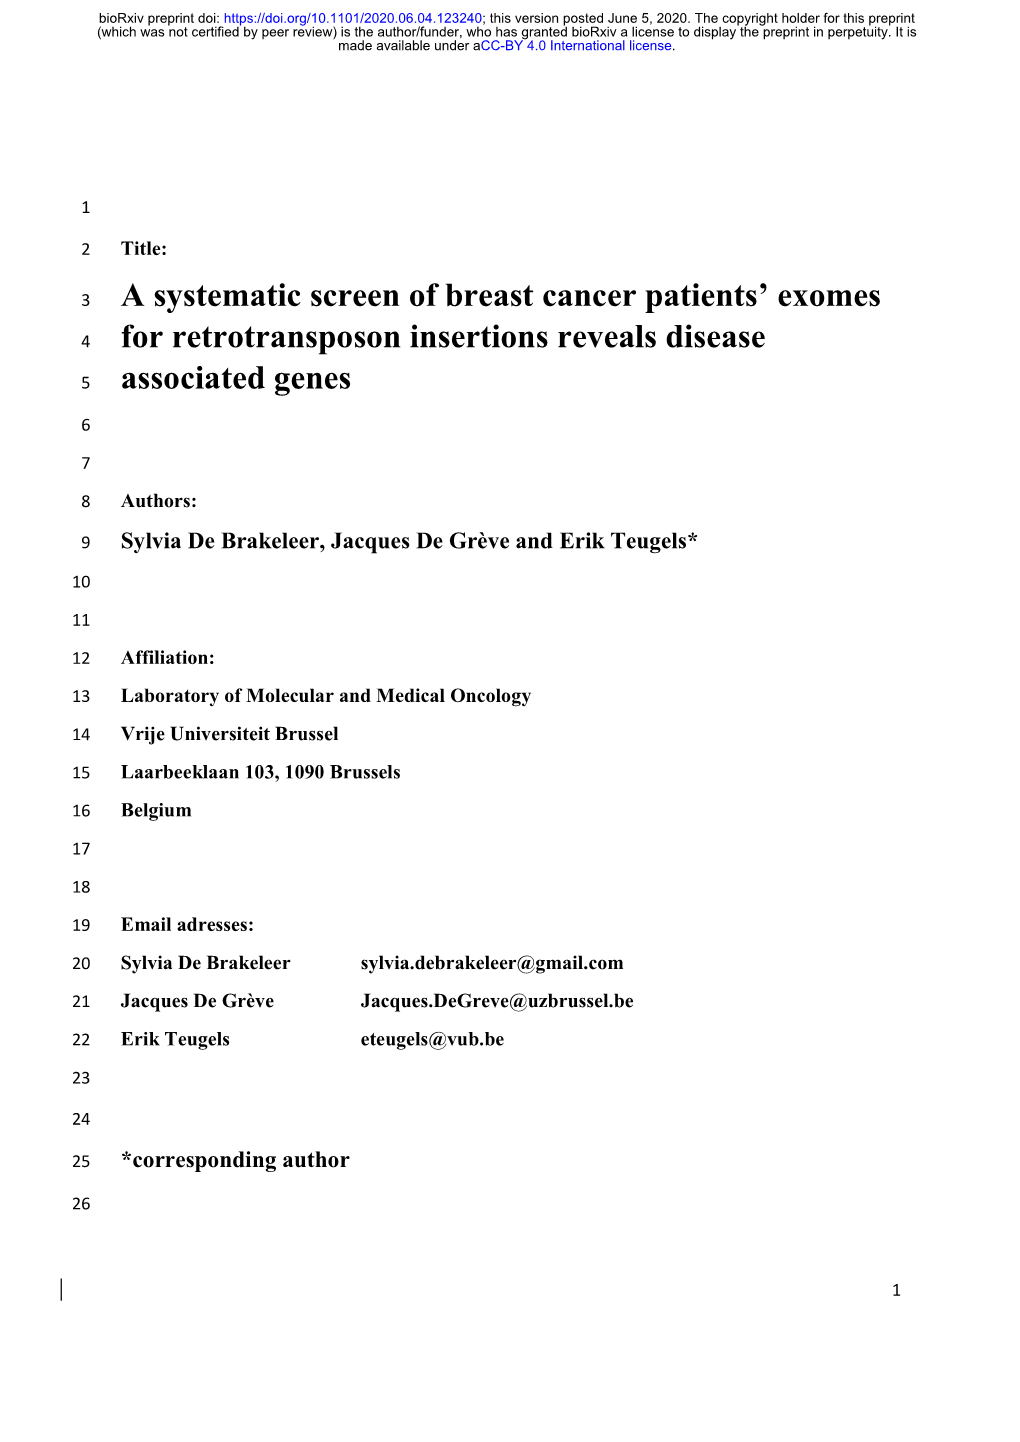 A Systematic Screen of Breast Cancer Patients' Exomes For